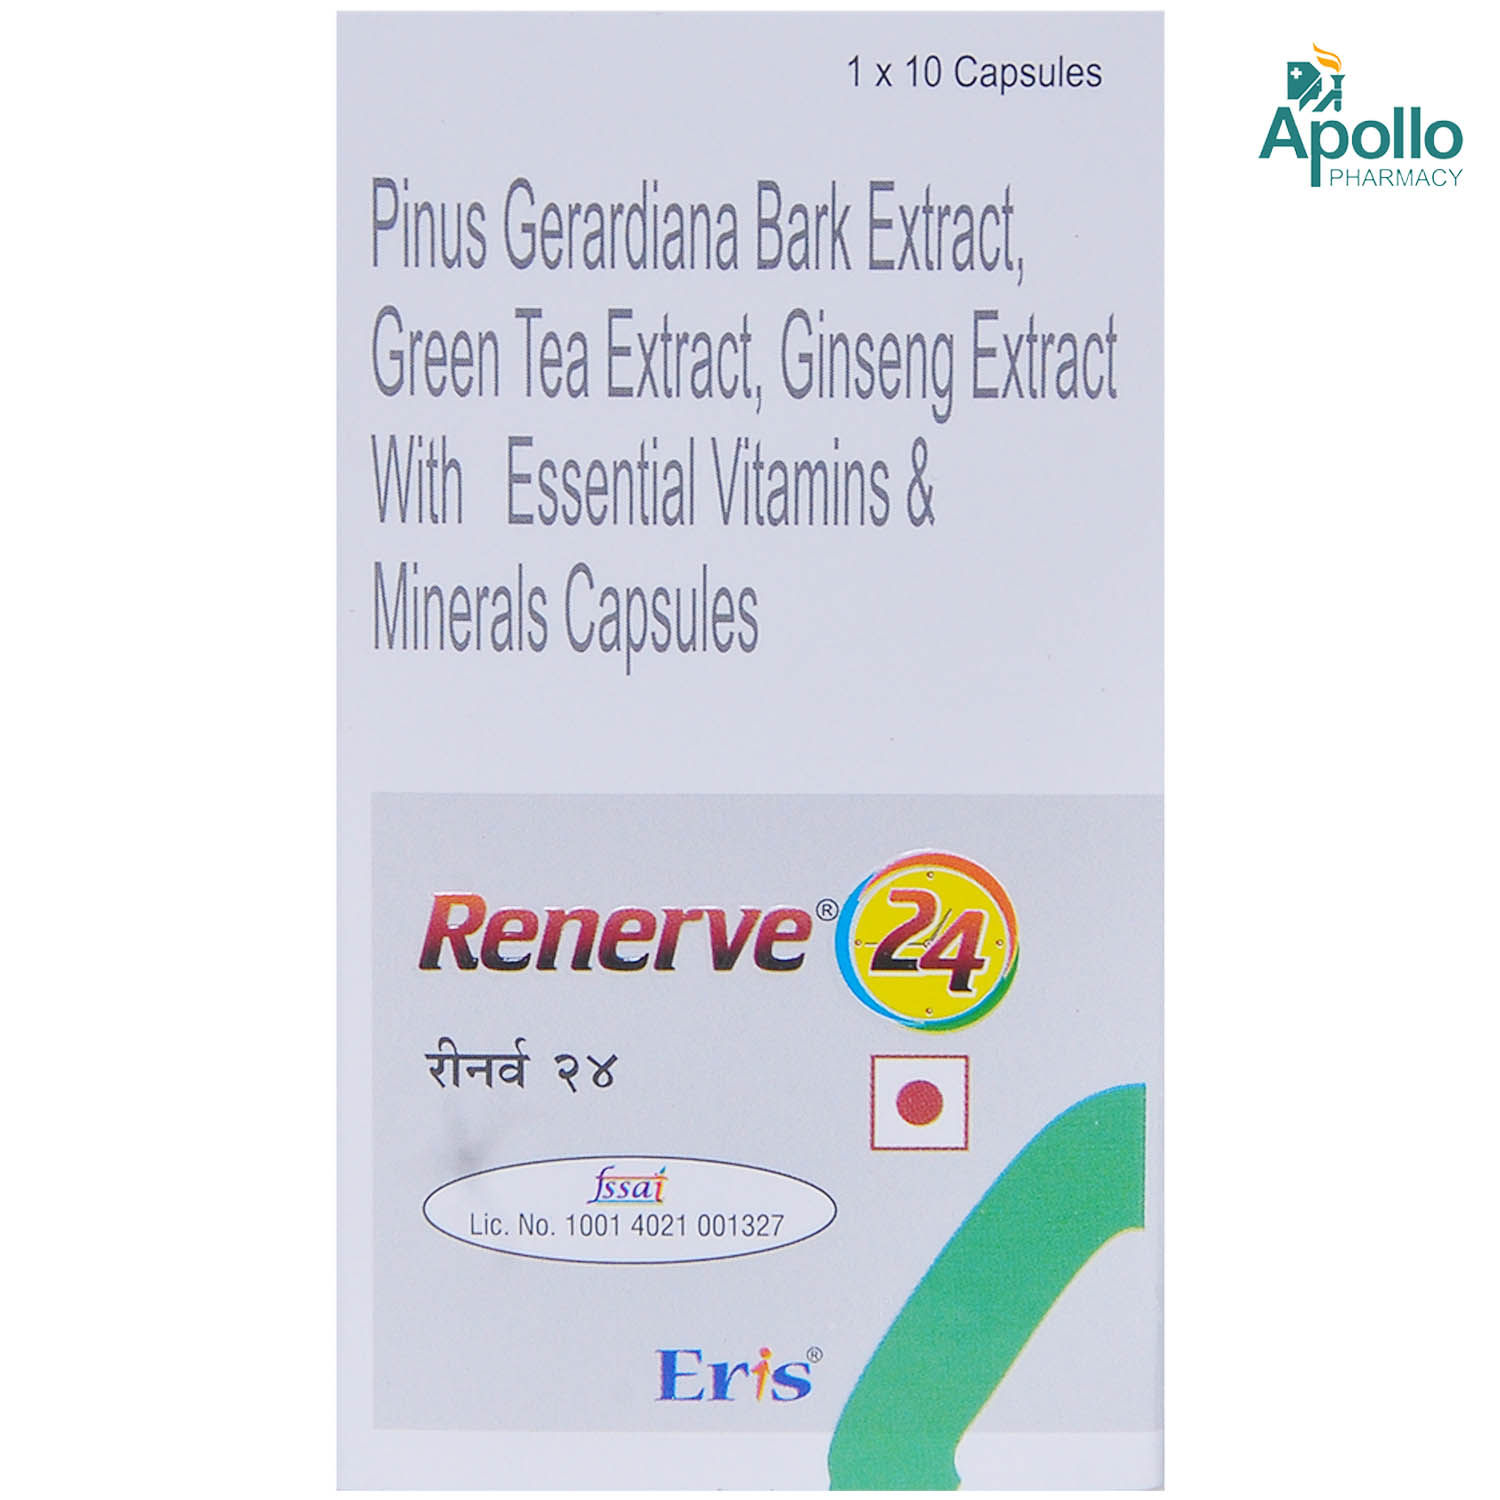 RENERVE 24 TABLET 10'S Price, Uses, Side Effects, Composition - Apollo ...